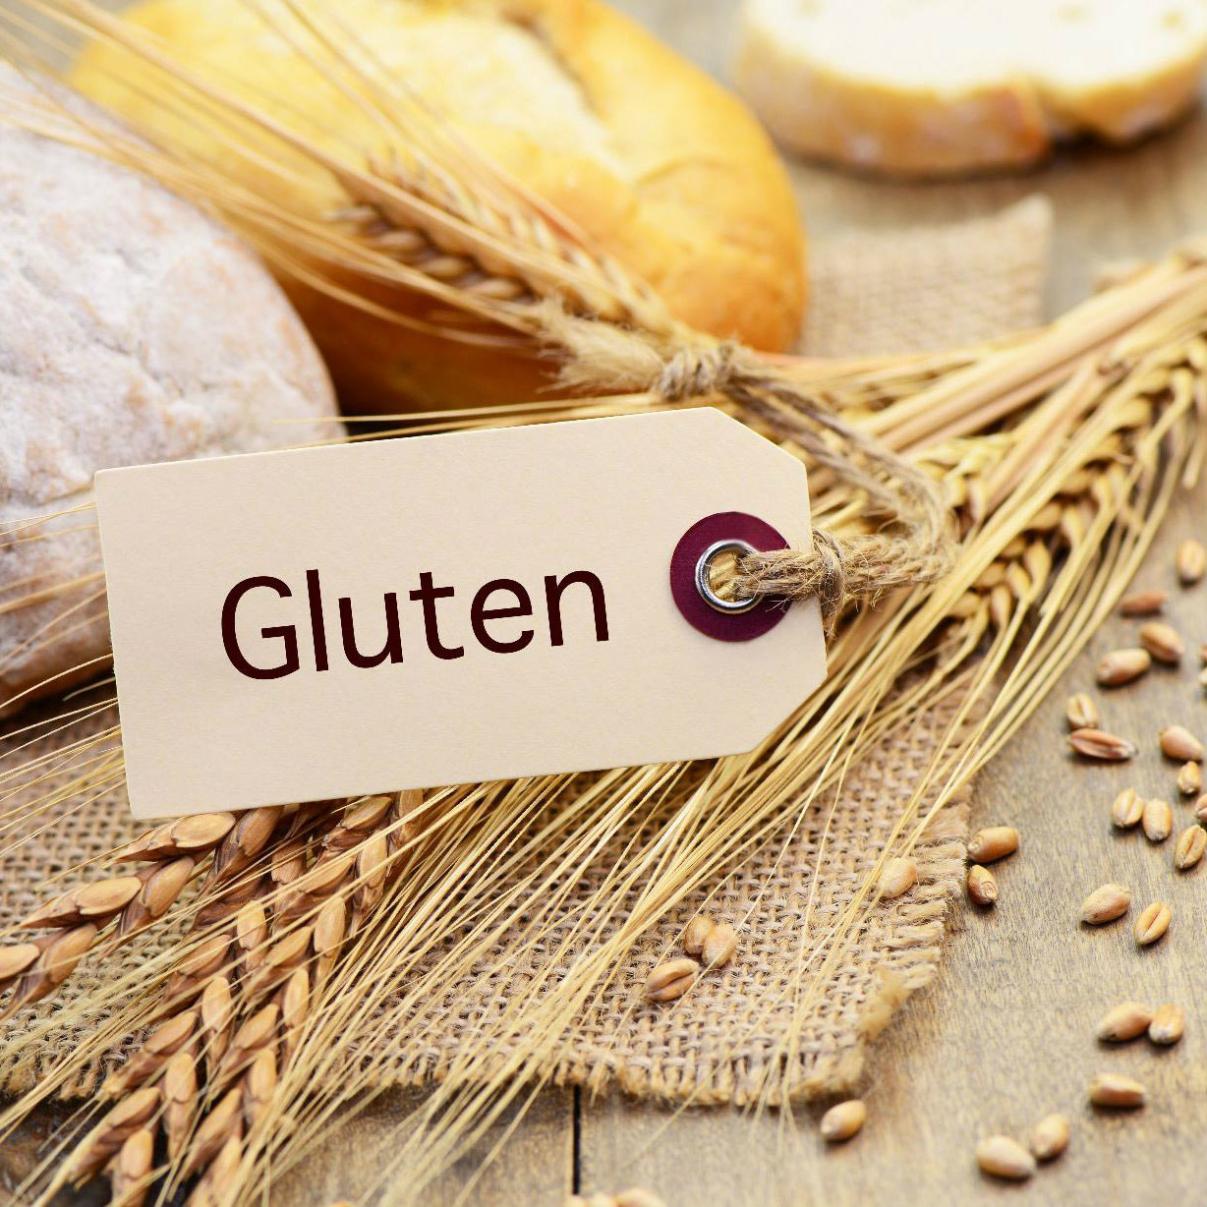 Gluten-Free Diet And Weight Management: Can I Lose Weight By Going Gluten-Free?